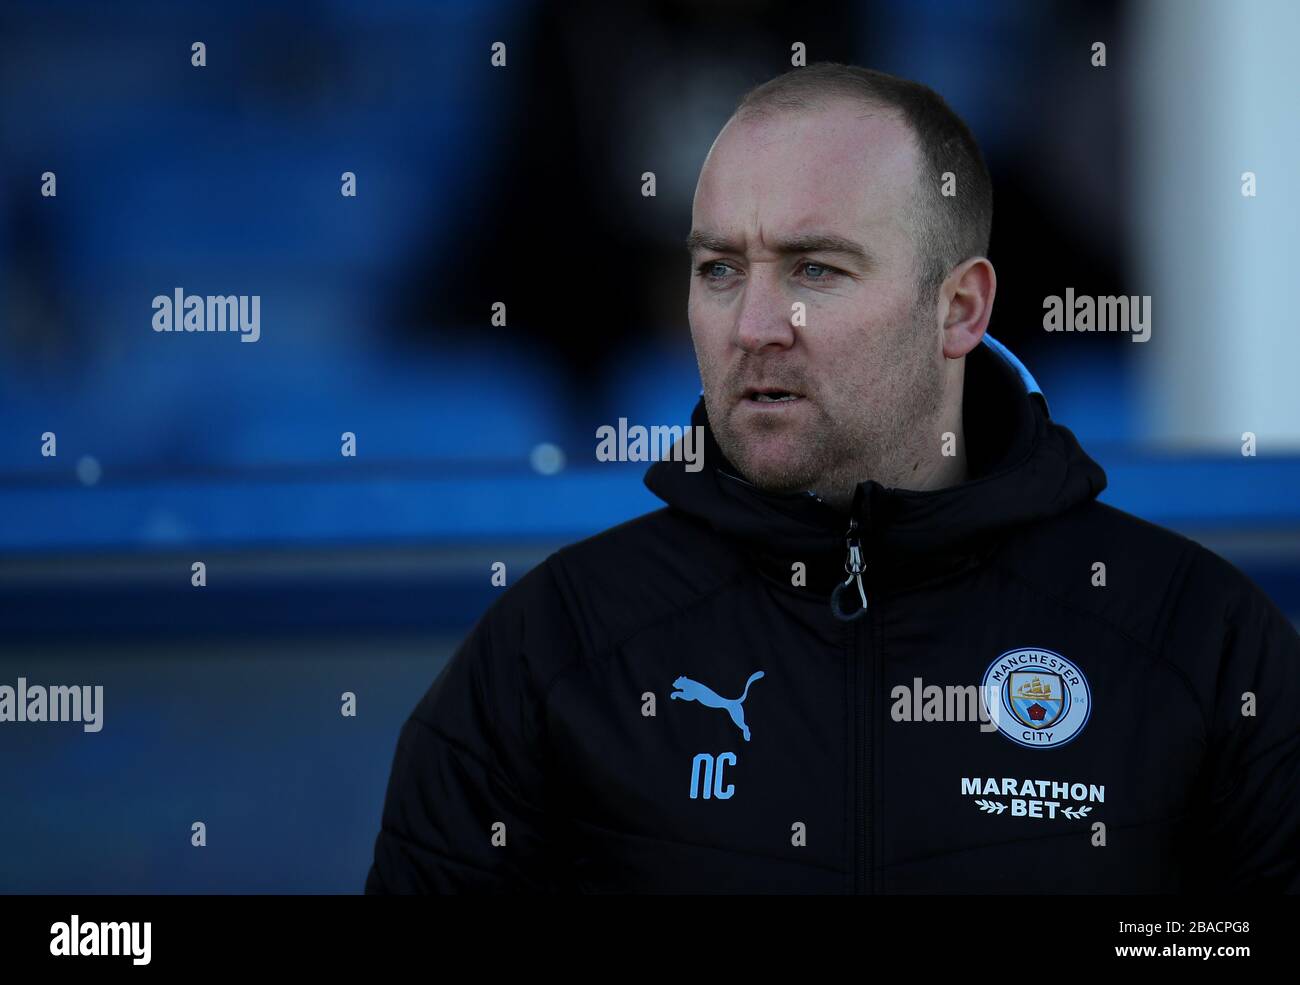 Manchester City's manager Nick Cushing Stock Photo